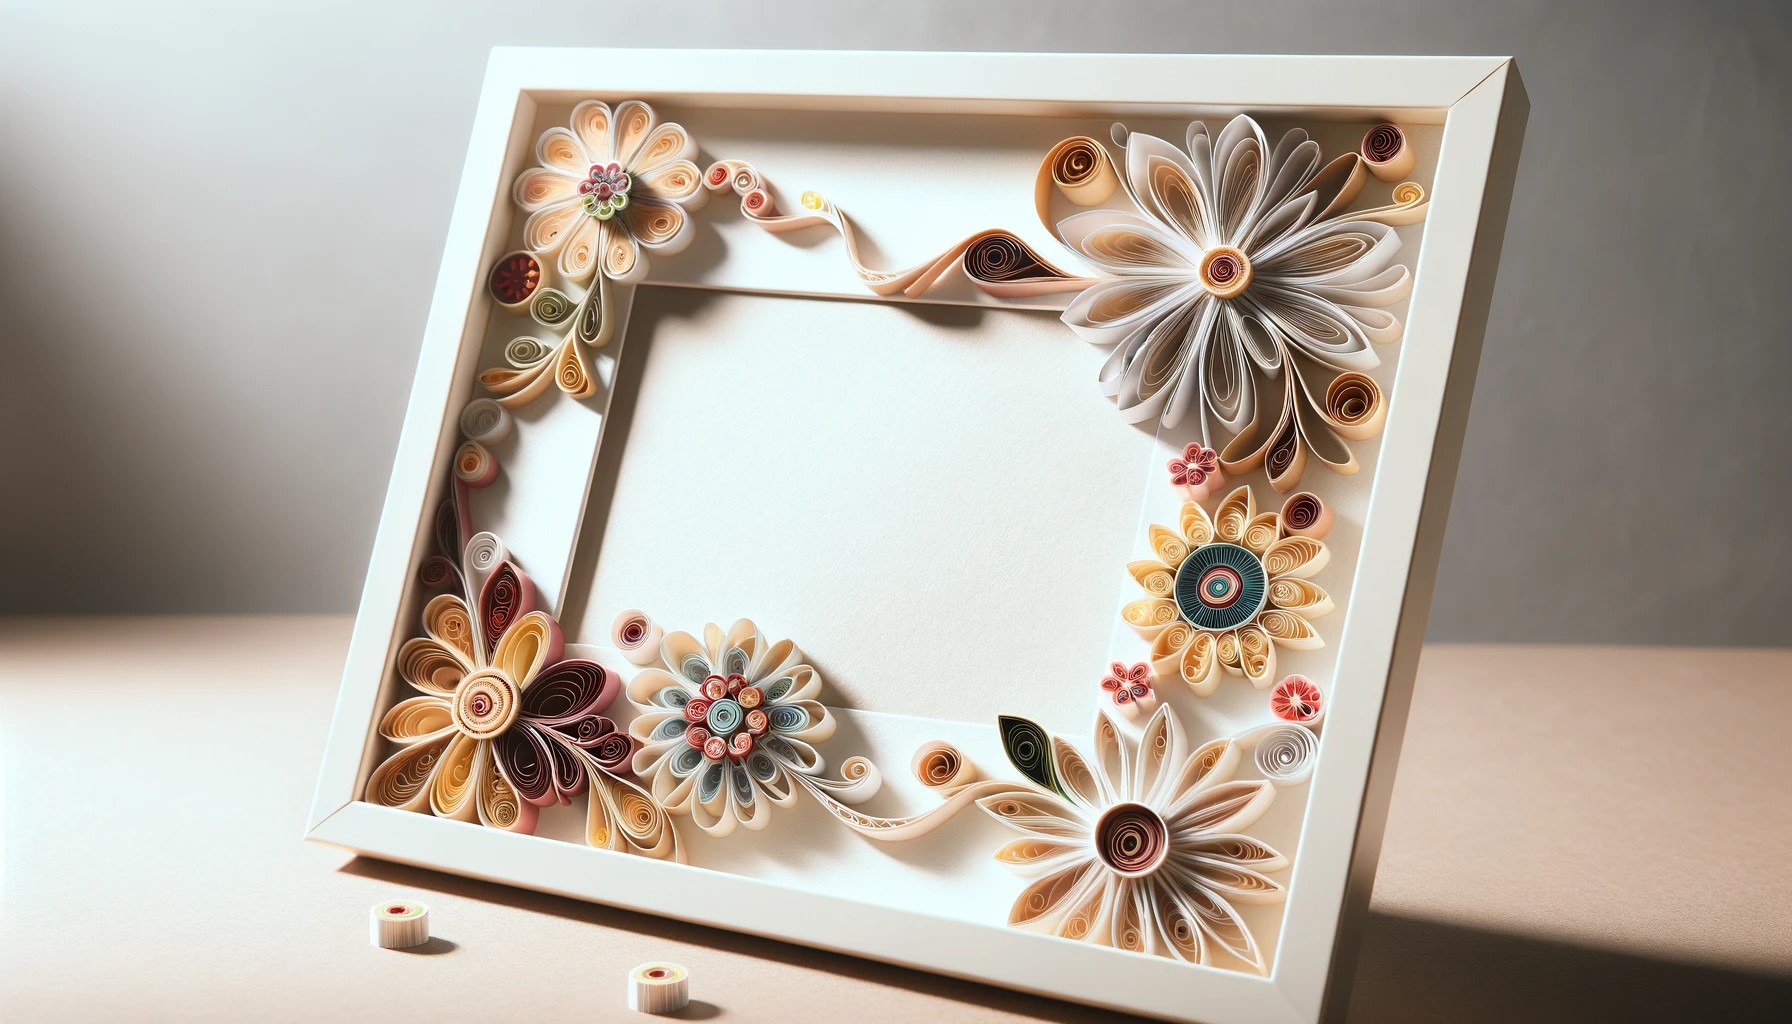 A frame showcasing an intricate paper quilling artwork with floral designs. The artwork features a variety of colors and shapes